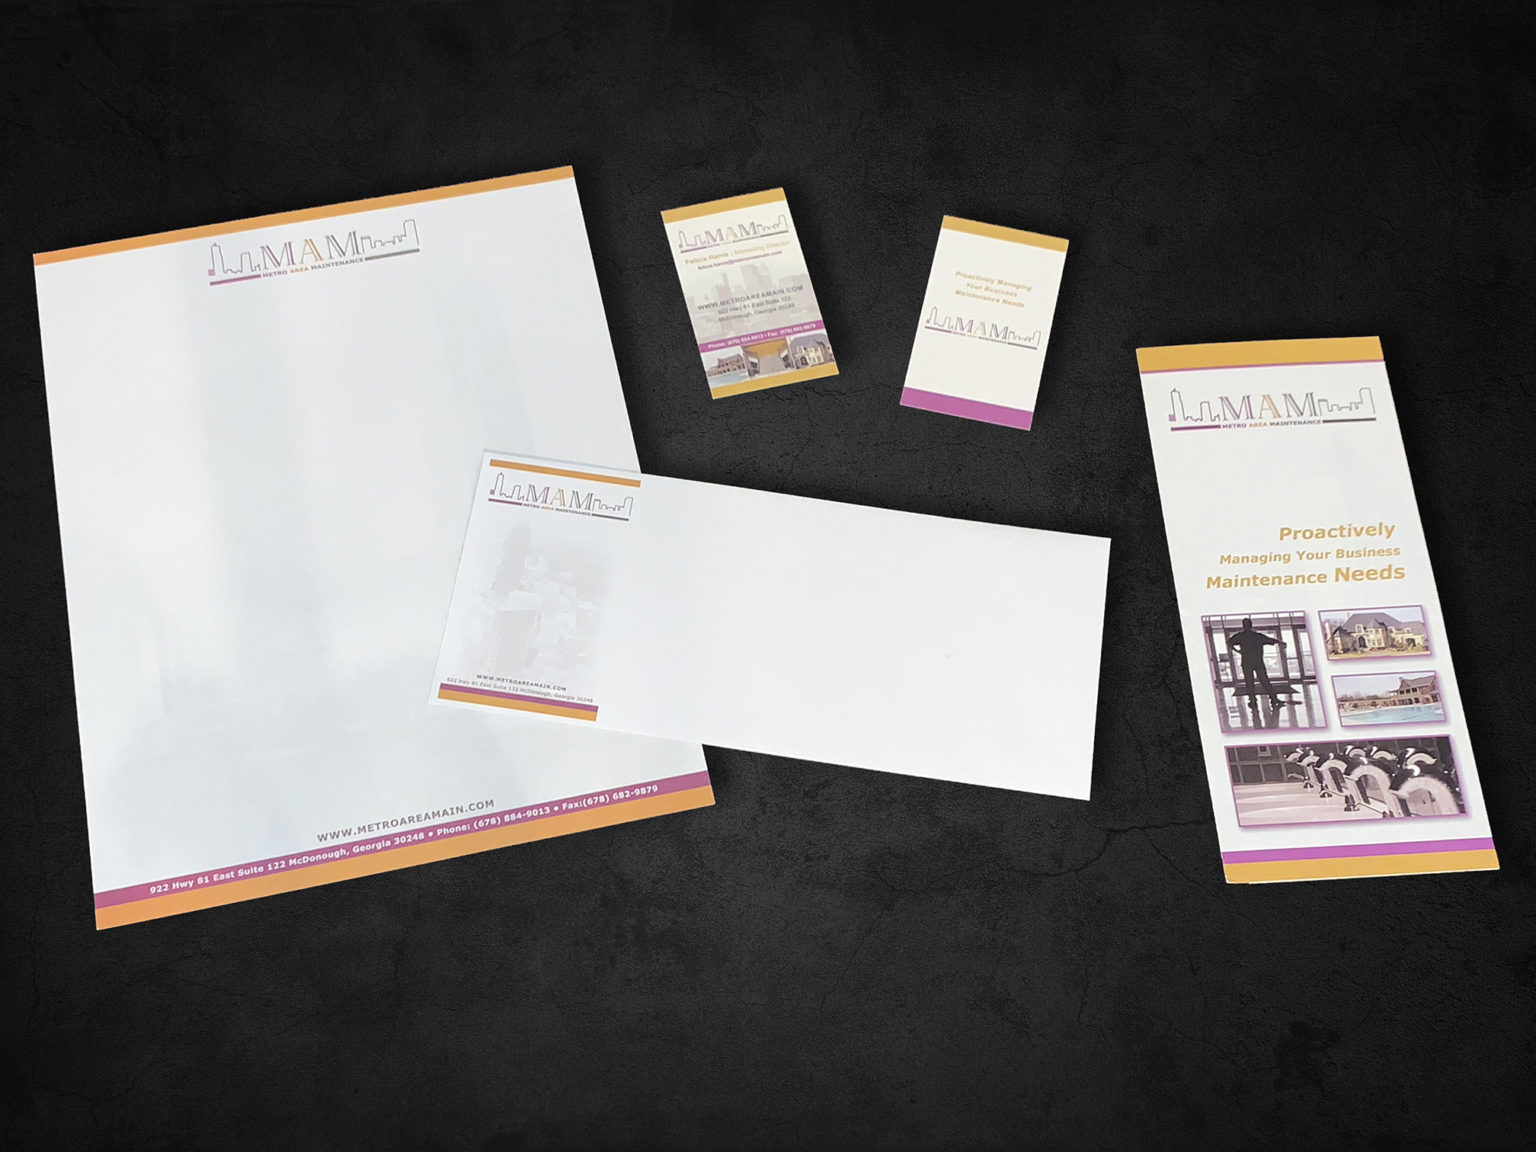 Metro Area Maintenance Corporate Identity and Letterhead • Designed by: Designs In Motion, Inc.